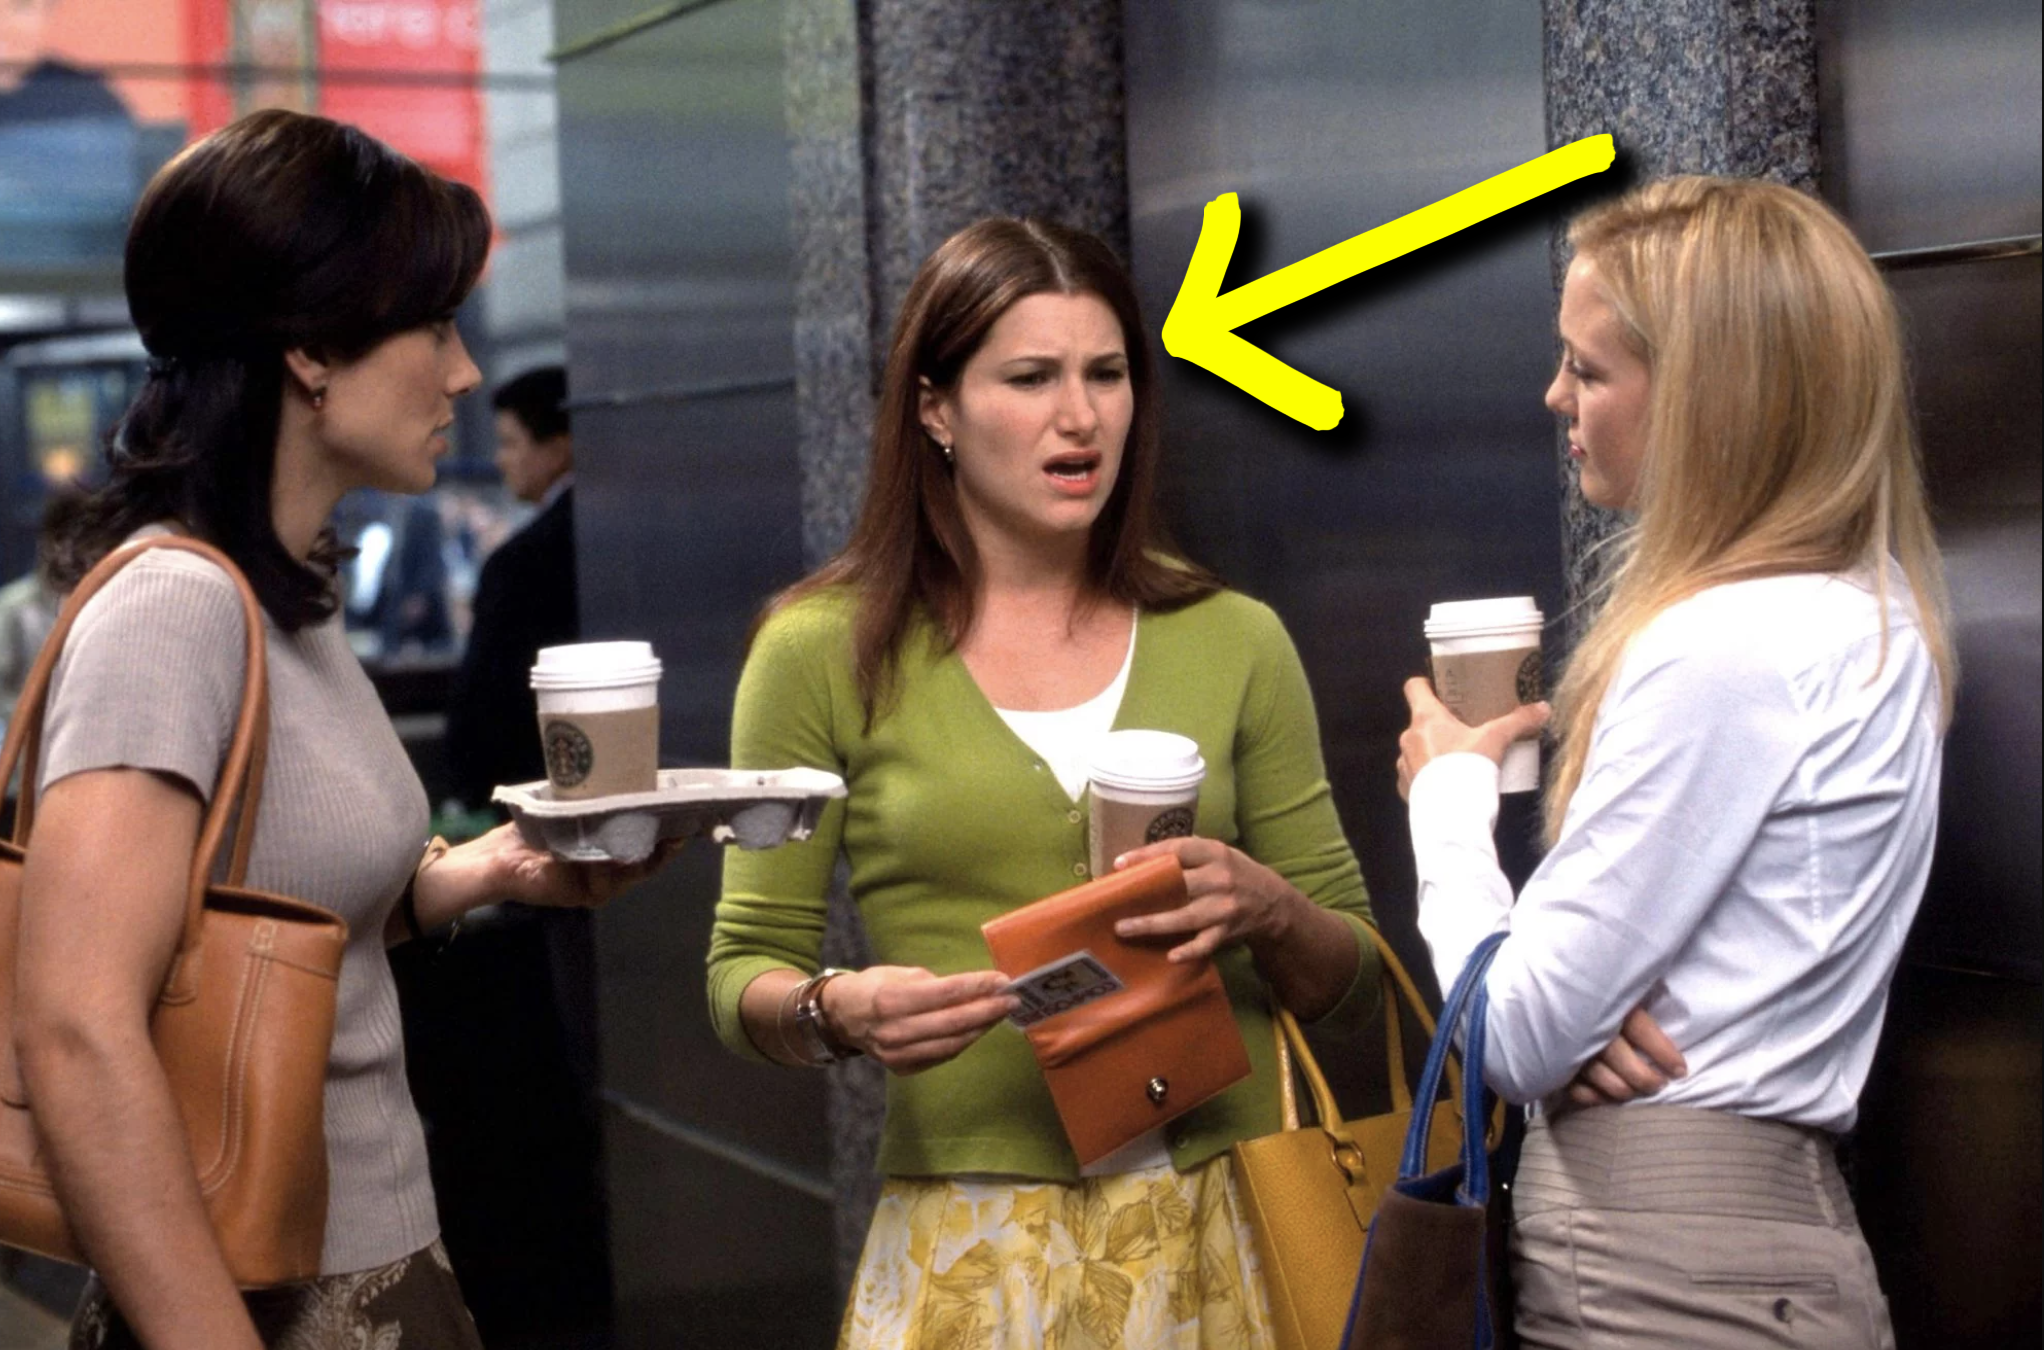 Kathryn in the movie holding a cup of coffee and gossiping 